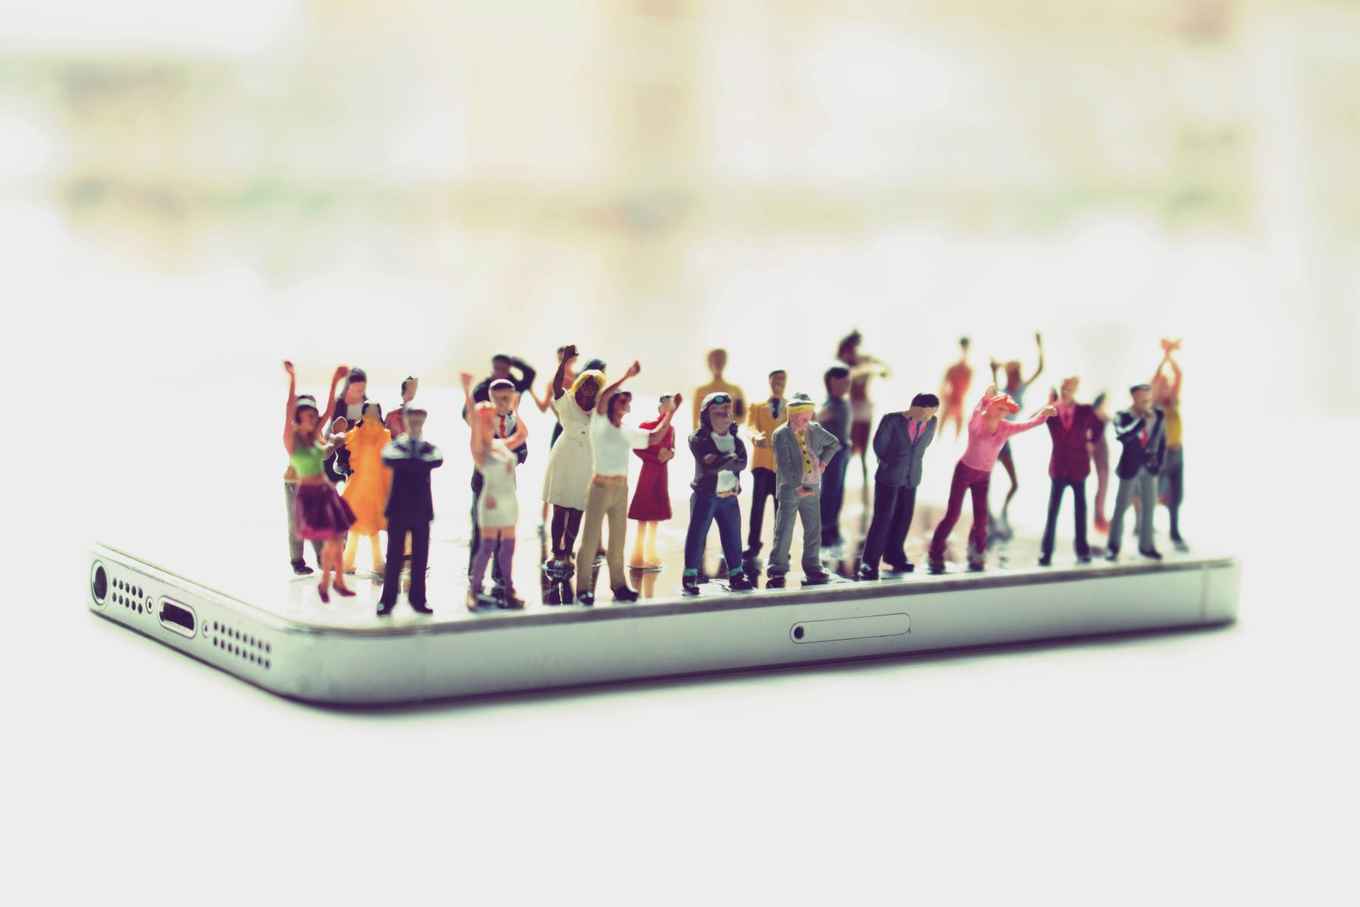 group of small figures standing on a mobile phone, shouting and with their fists in the air